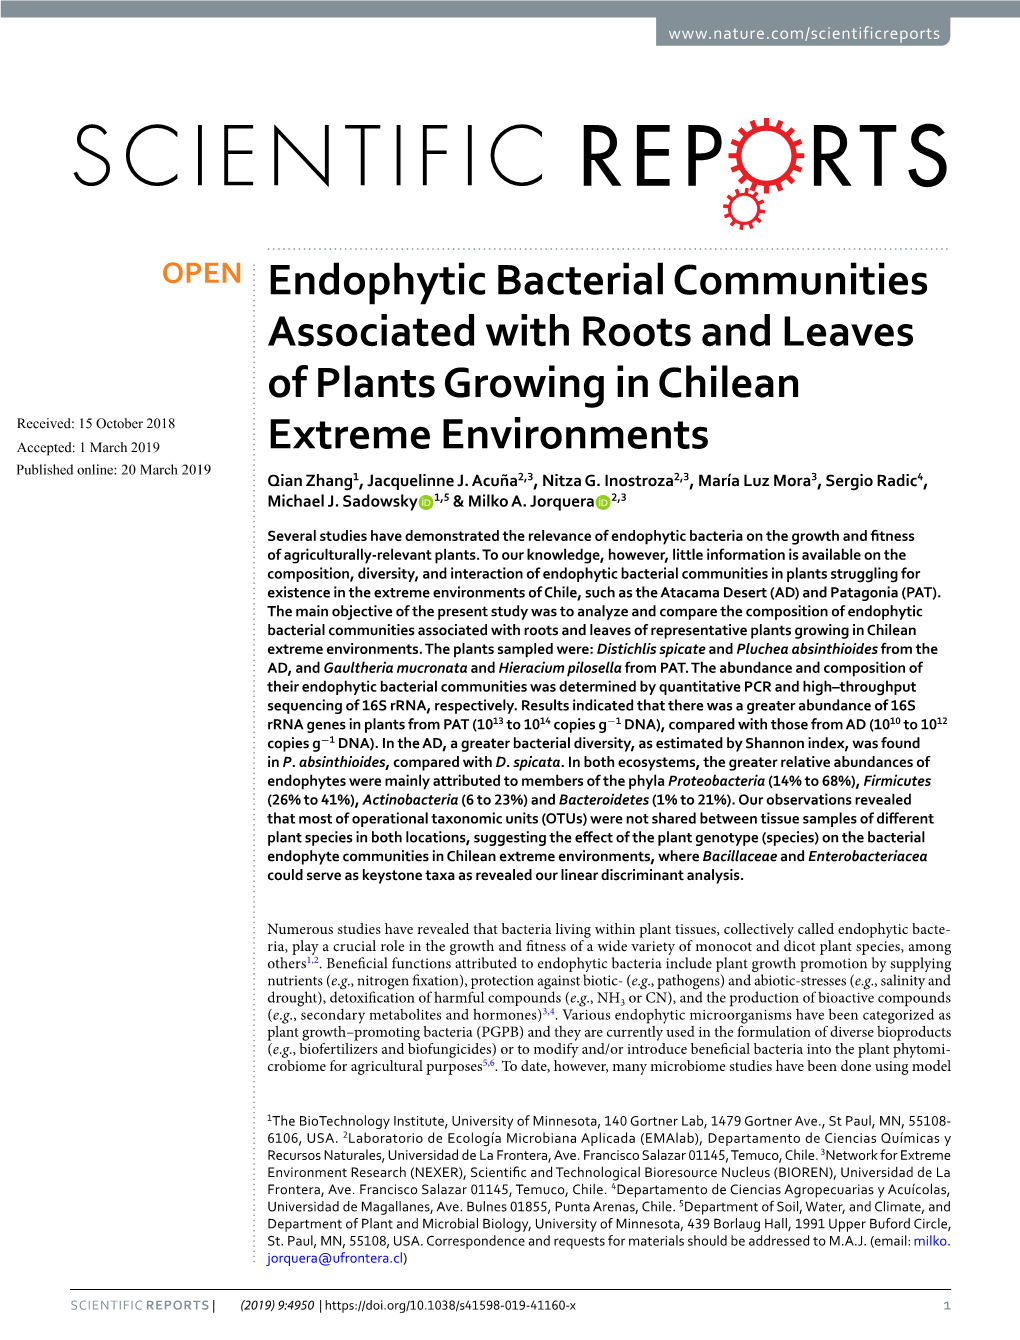 Endophytic Bacterial Communities Associated with Roots and Leaves of Plants Growing in Chilean Extreme Environments